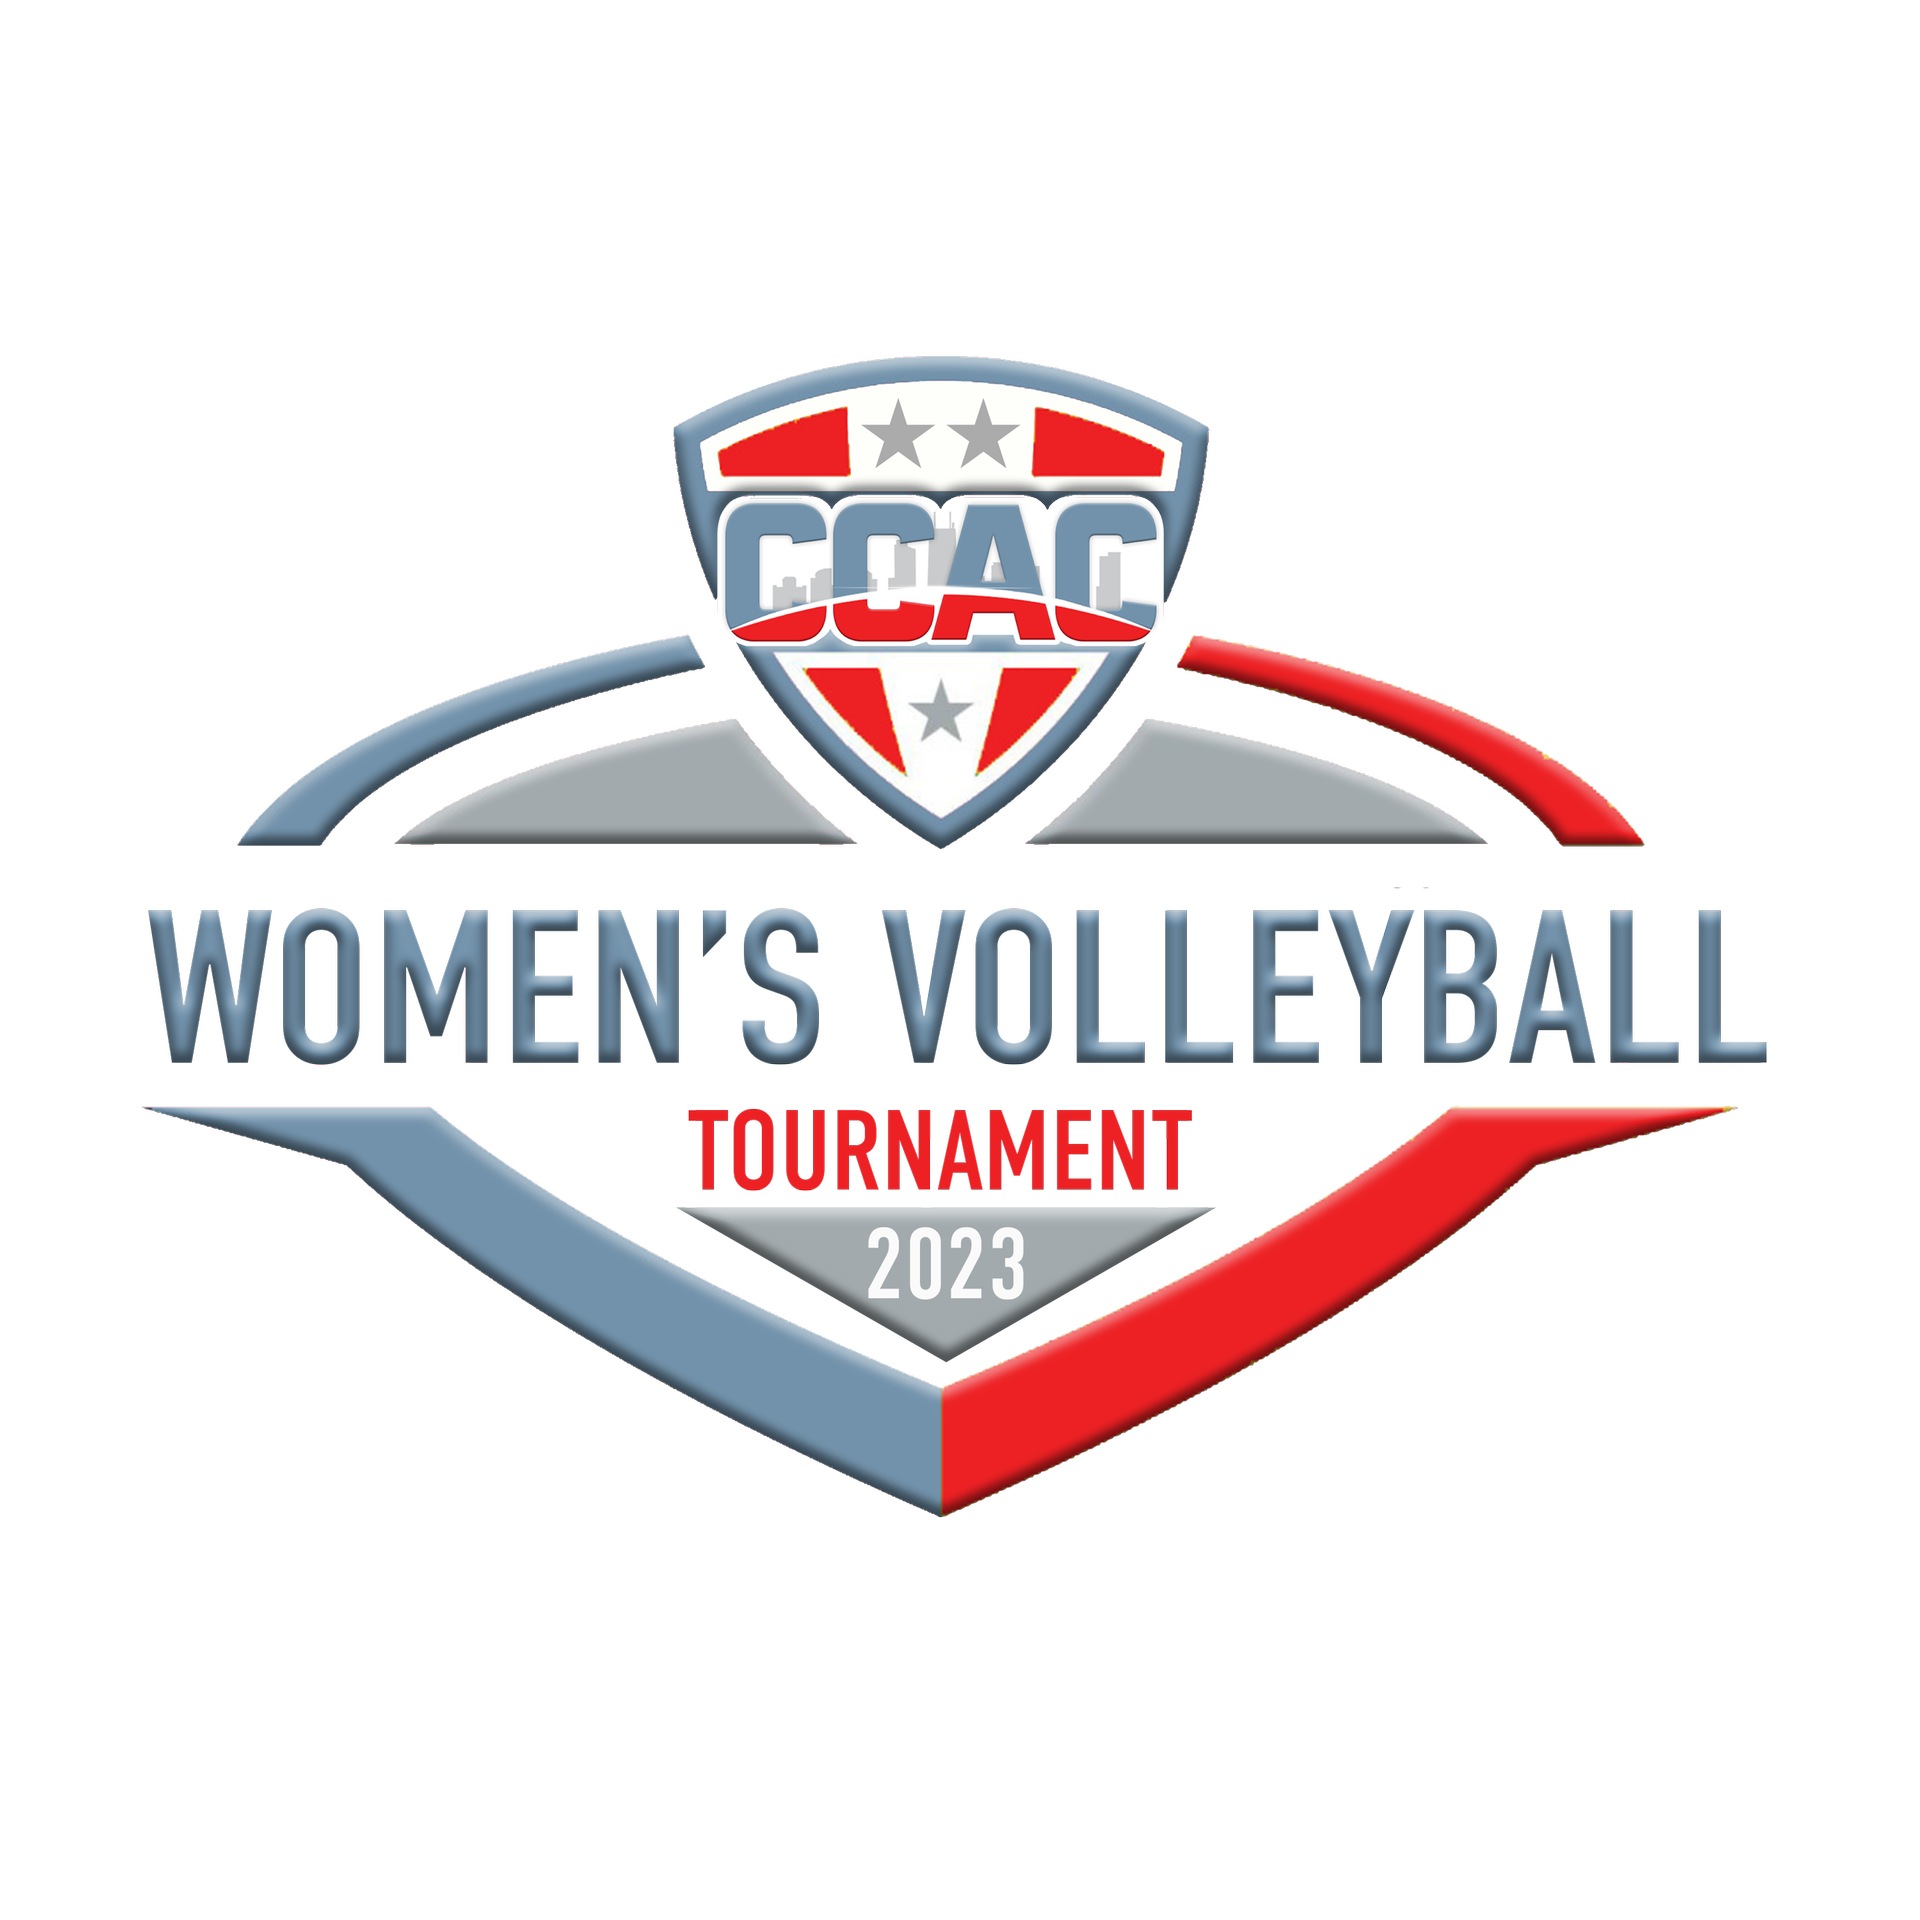 Judson Favored In CCAC Women's Volleyball Tournament